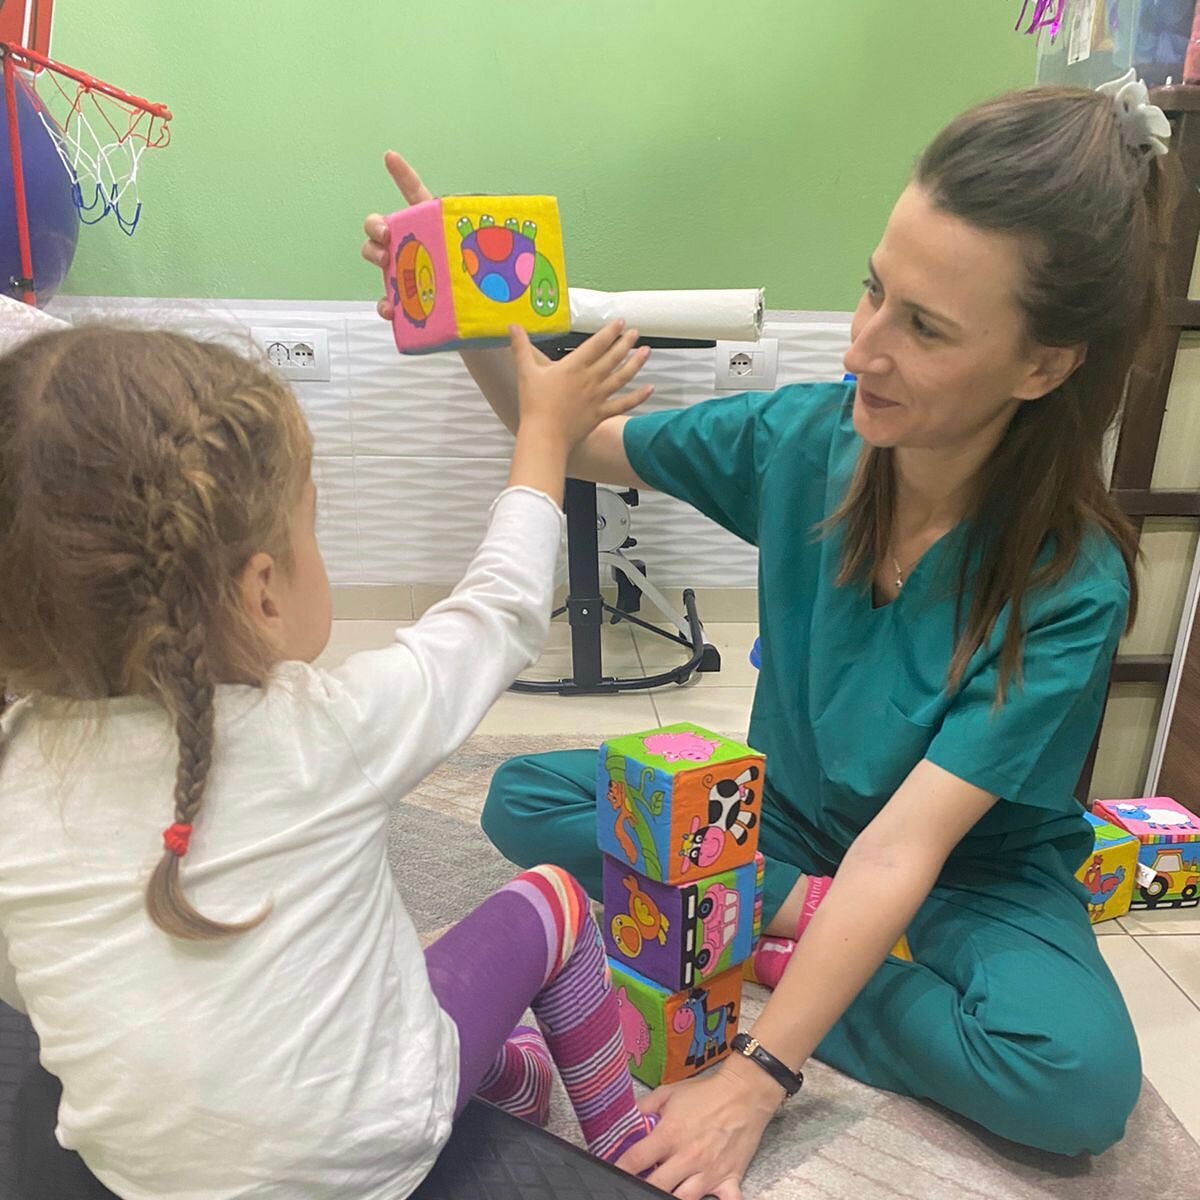 Balance training and coordination exercises with one of our young guests today #rehab #physioforall #fizio #rehabilitation #therapy #childtherapy #wearetekura #inclusion #albania🇦🇱 #tirana